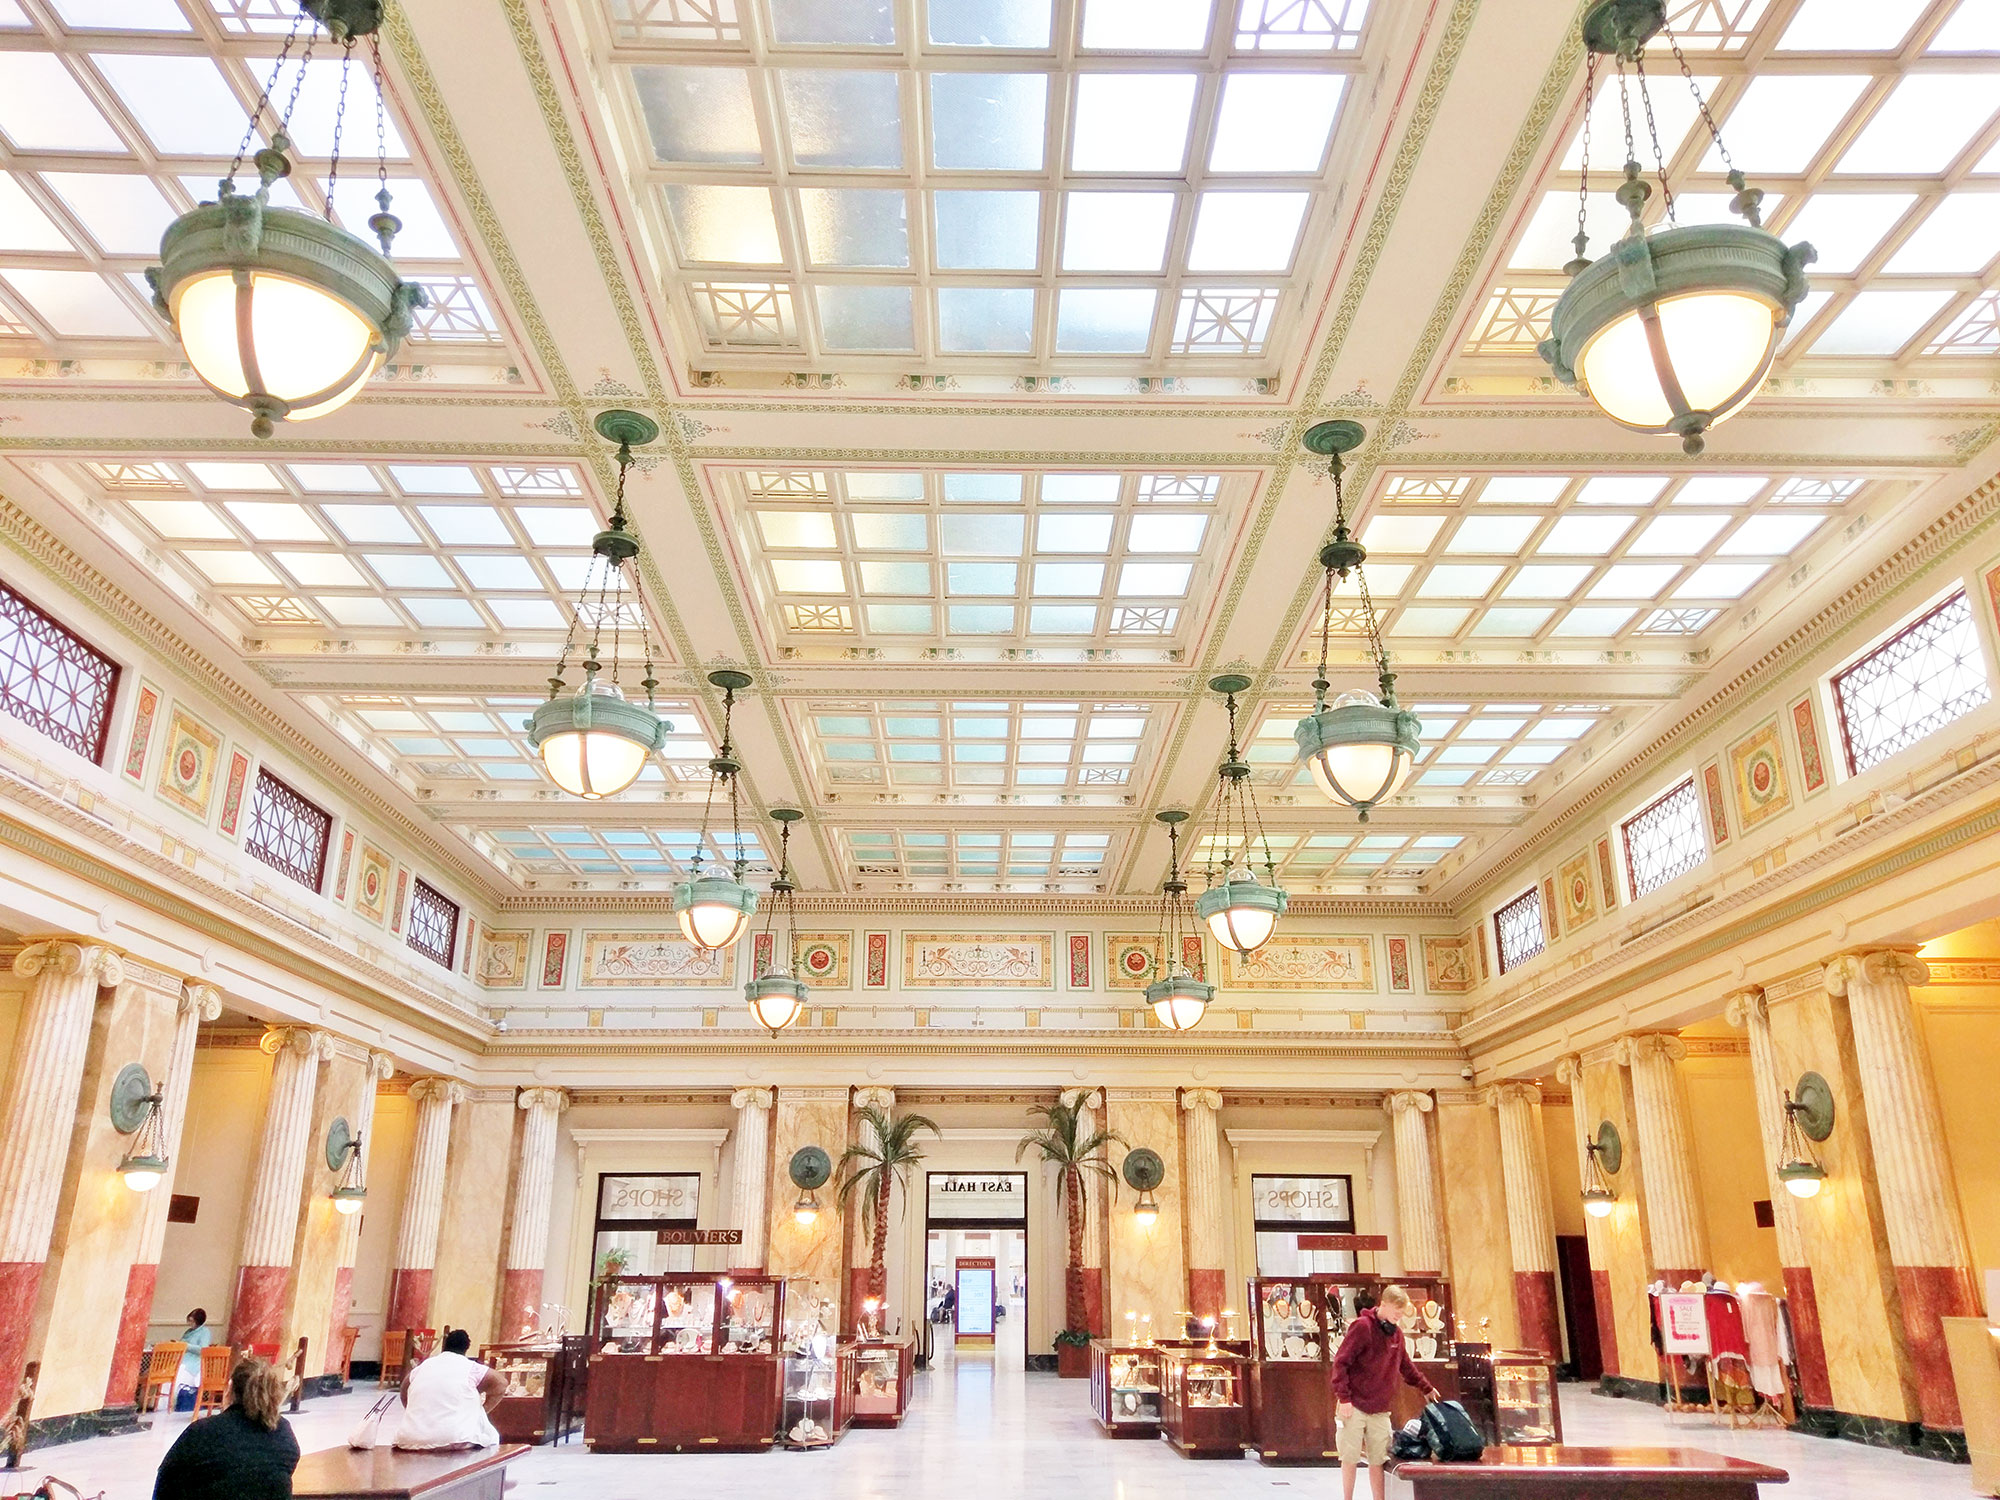 A palm room inside of Union Station in Washington D.C.